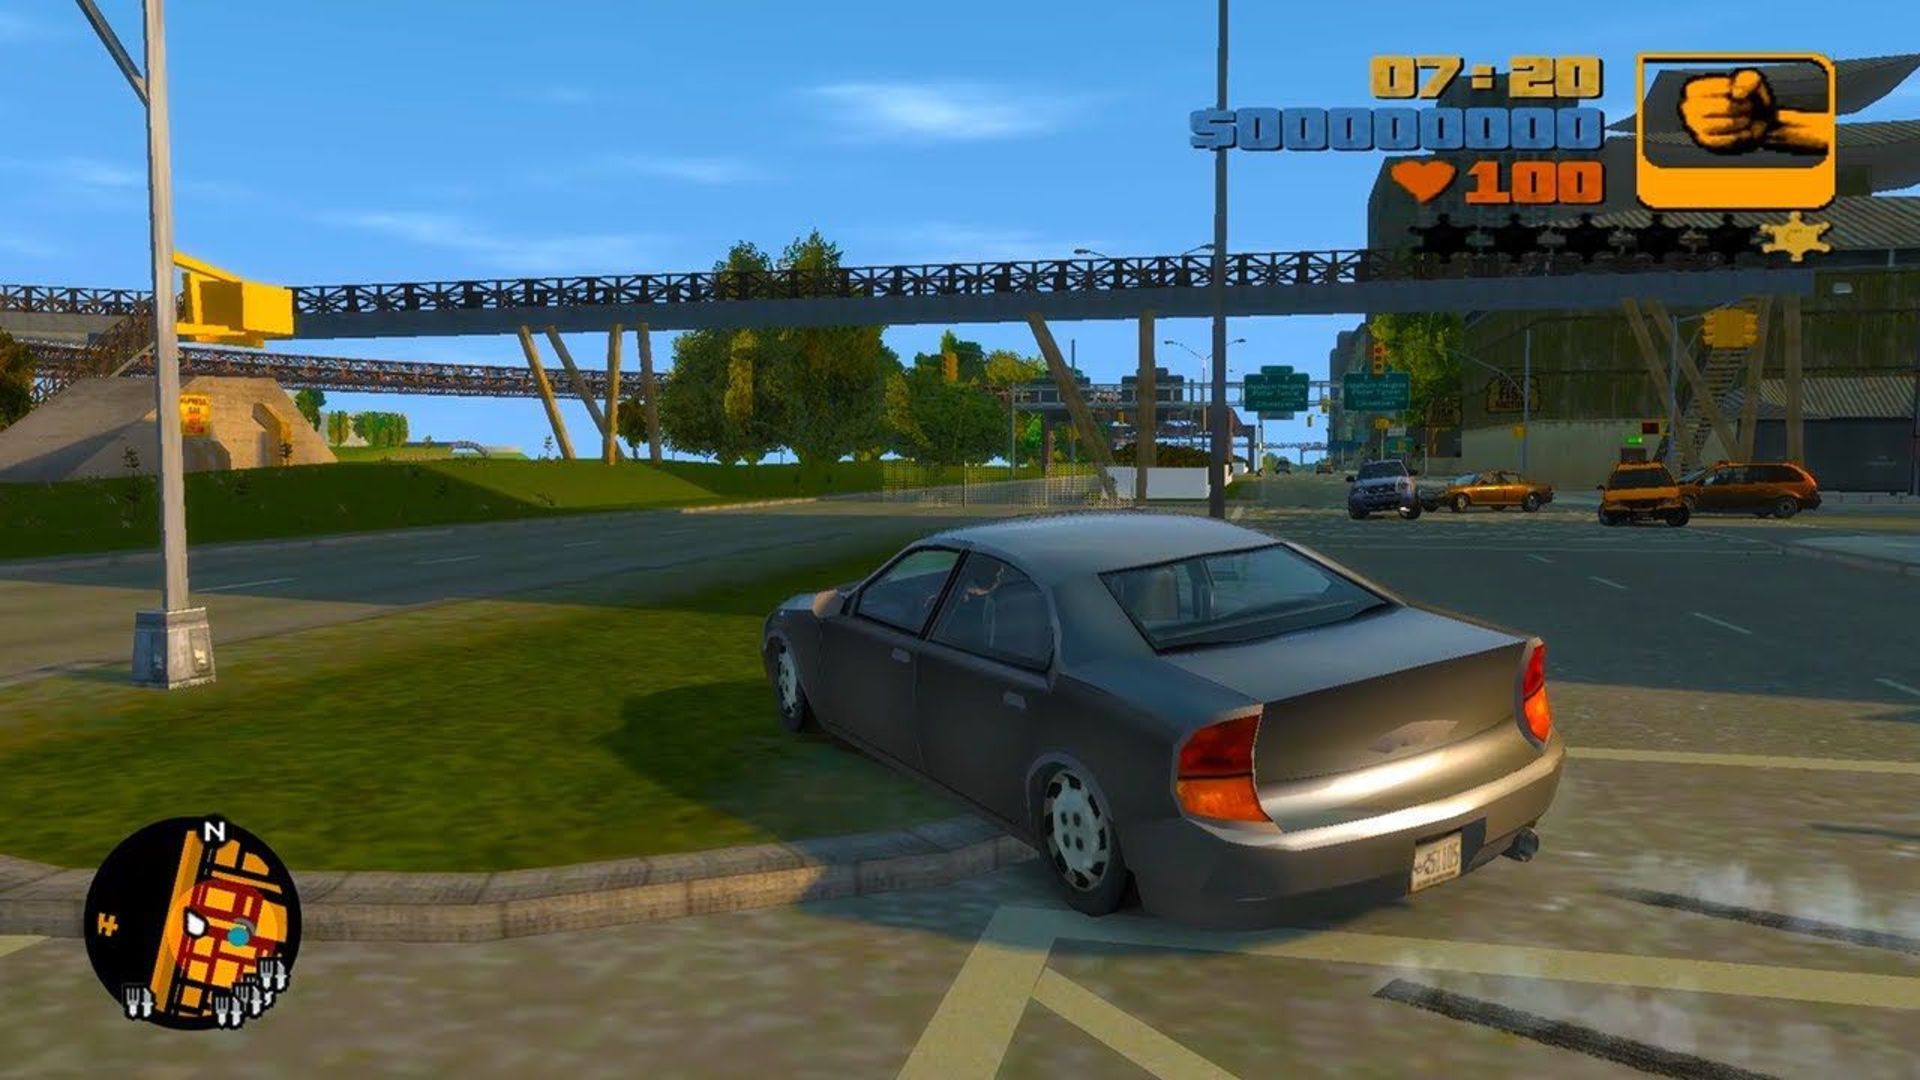 Gameplay from GTA 3.